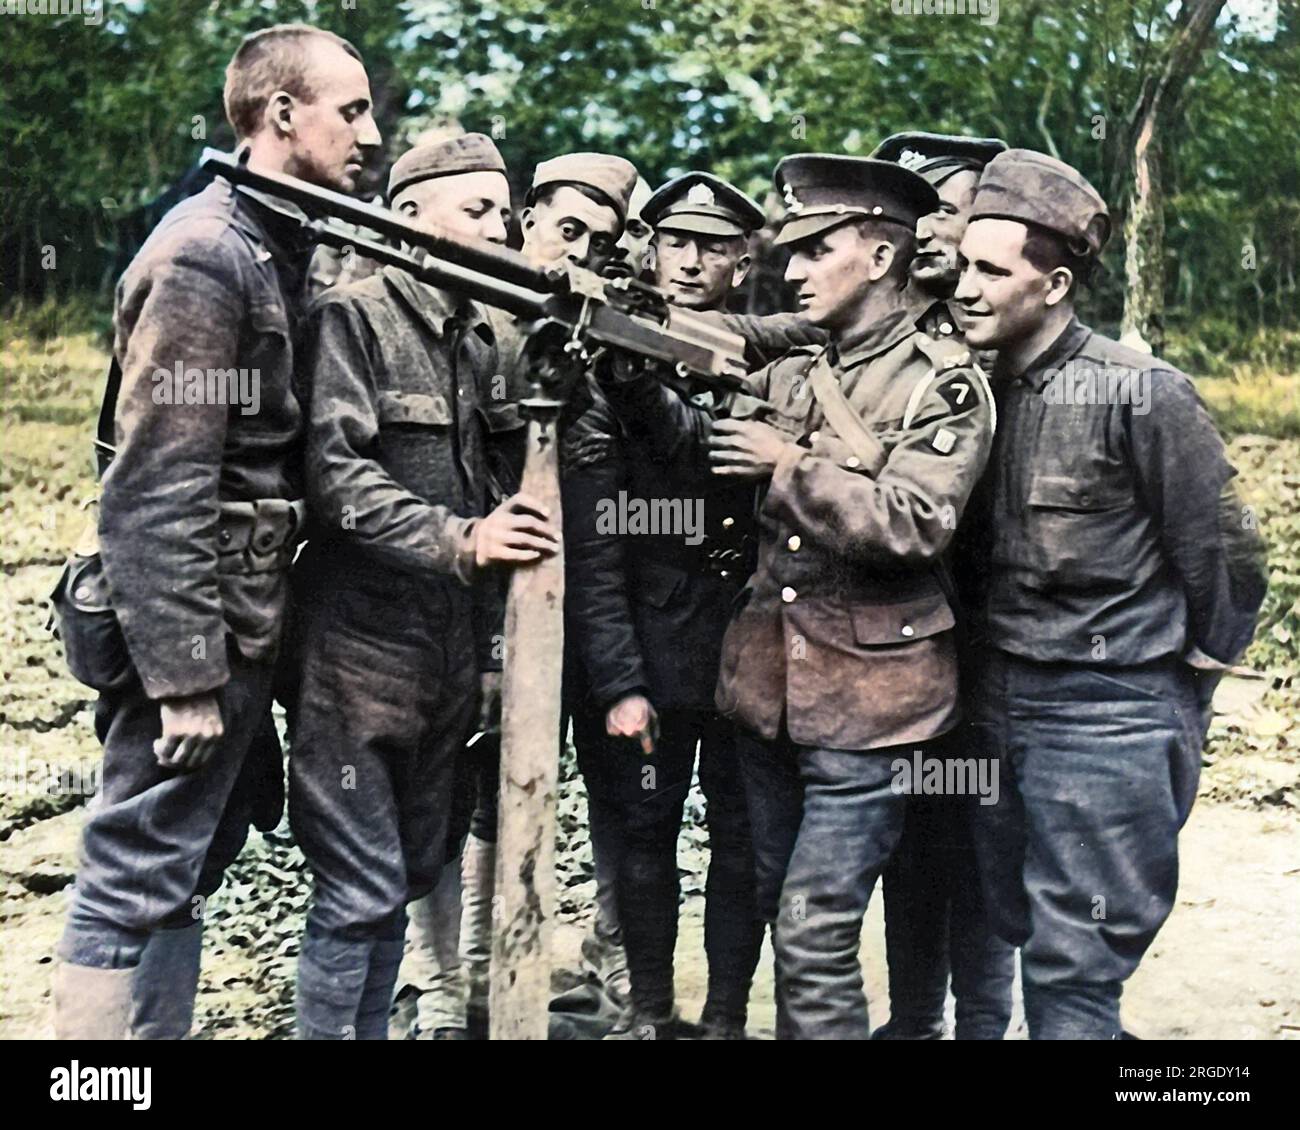 A British machine gunner demonstrates the workings of a gun to American troops on the Western Front in France during World War One. Stock Photo